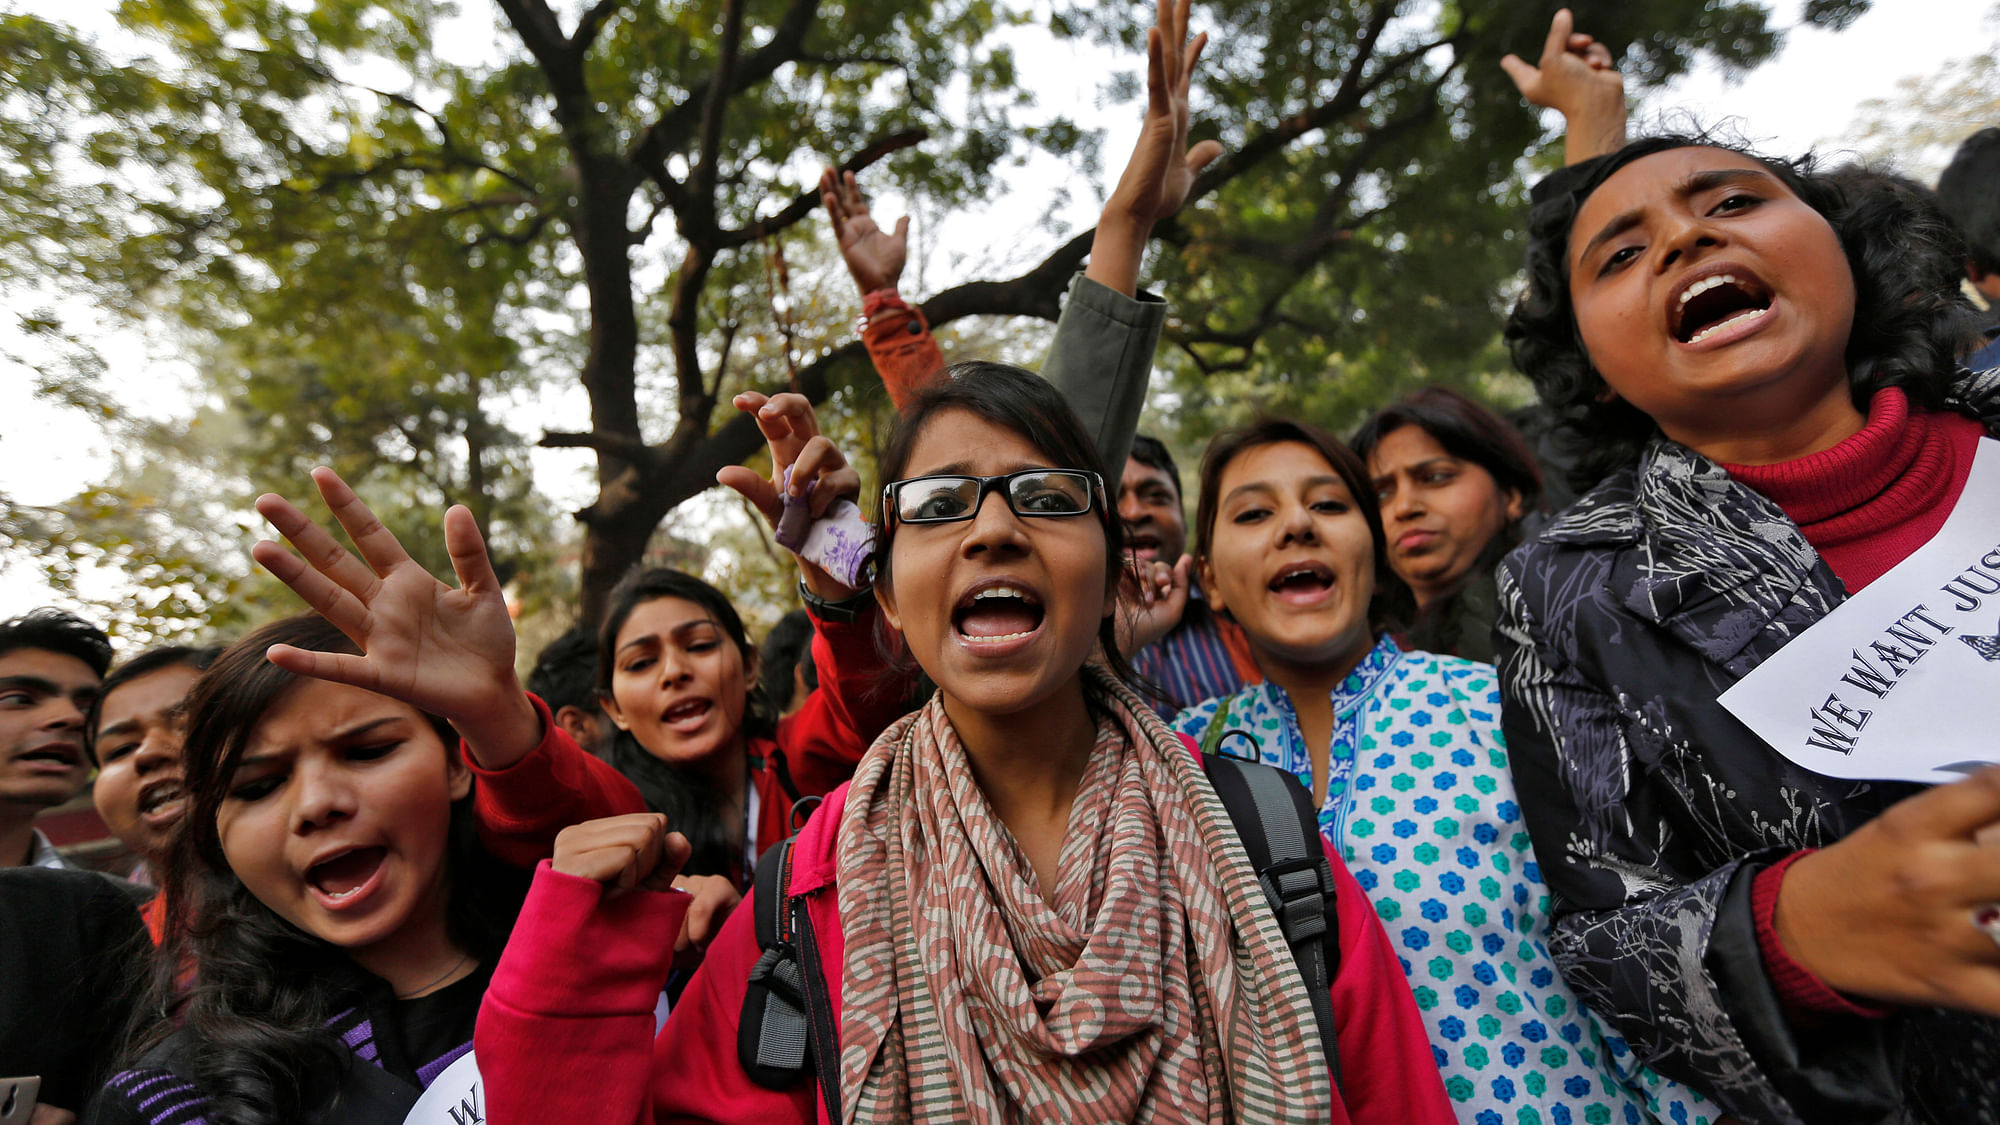 Protesters ask for justice in the Nirbhaya case. (Photo: Reuters)